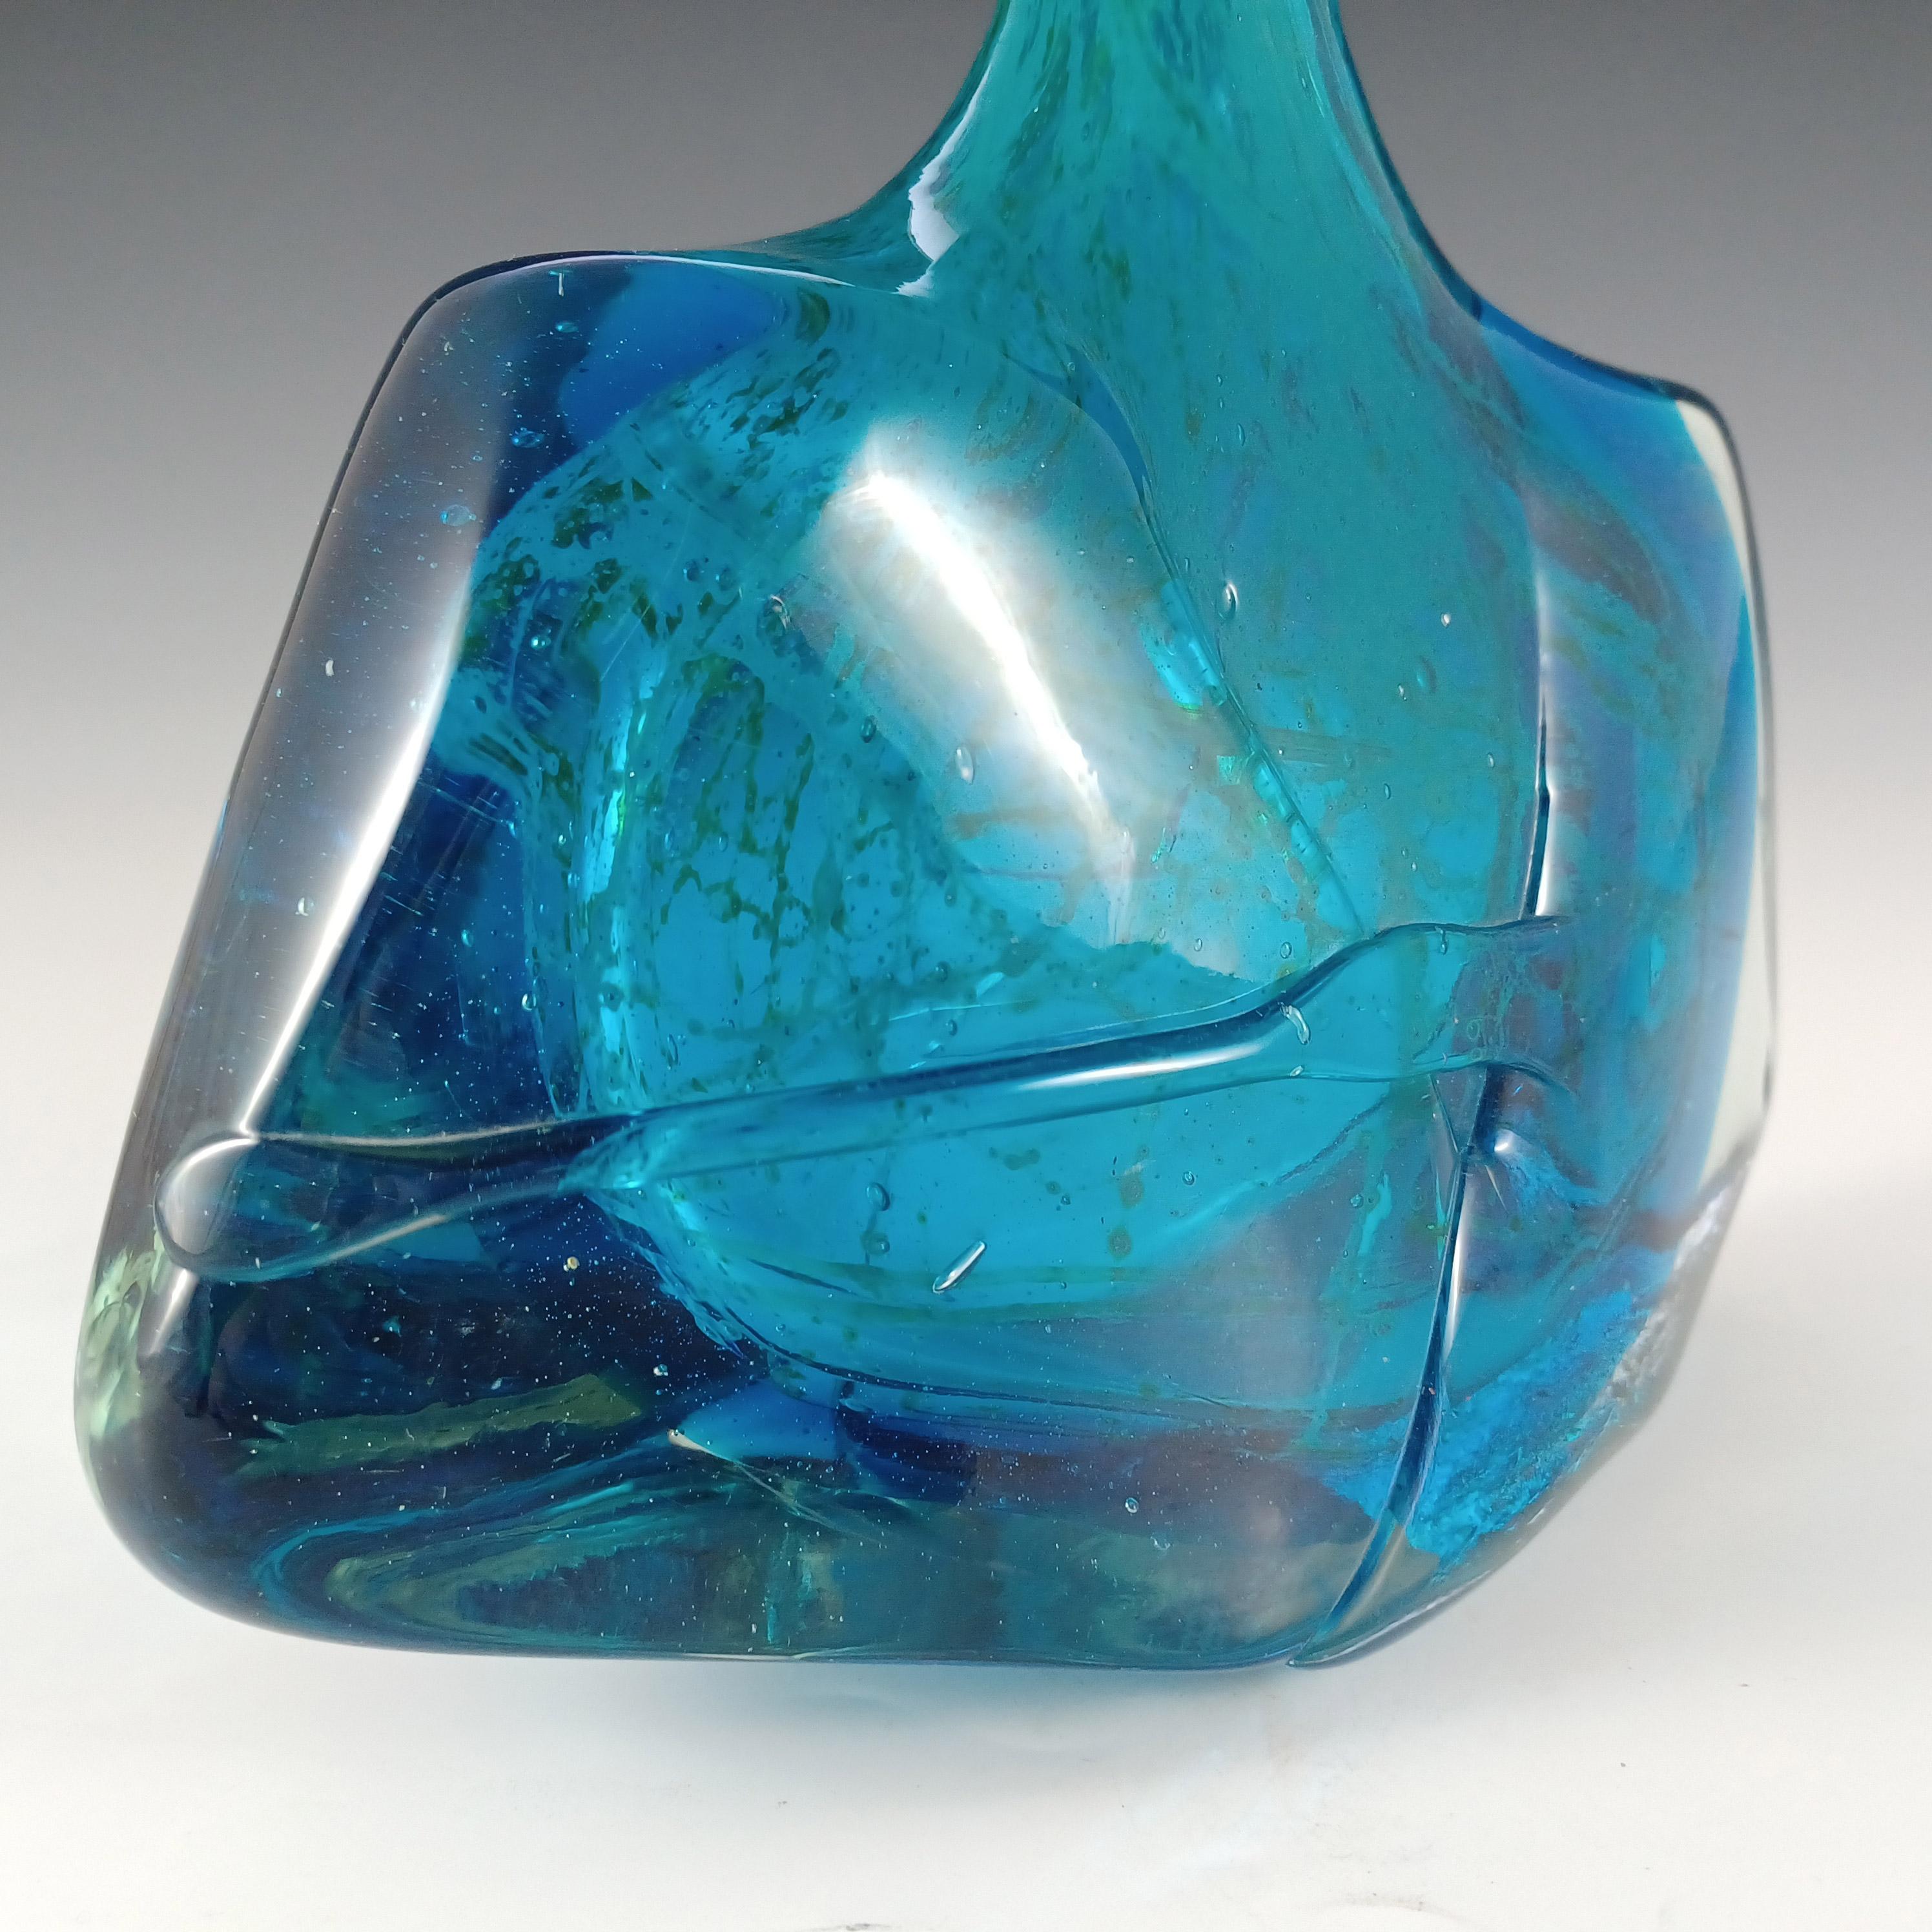 Late 20th Century Mdina Maltese Blue Glass 'Fish' / 'Axe Head' Vase - Signed 1979 For Sale